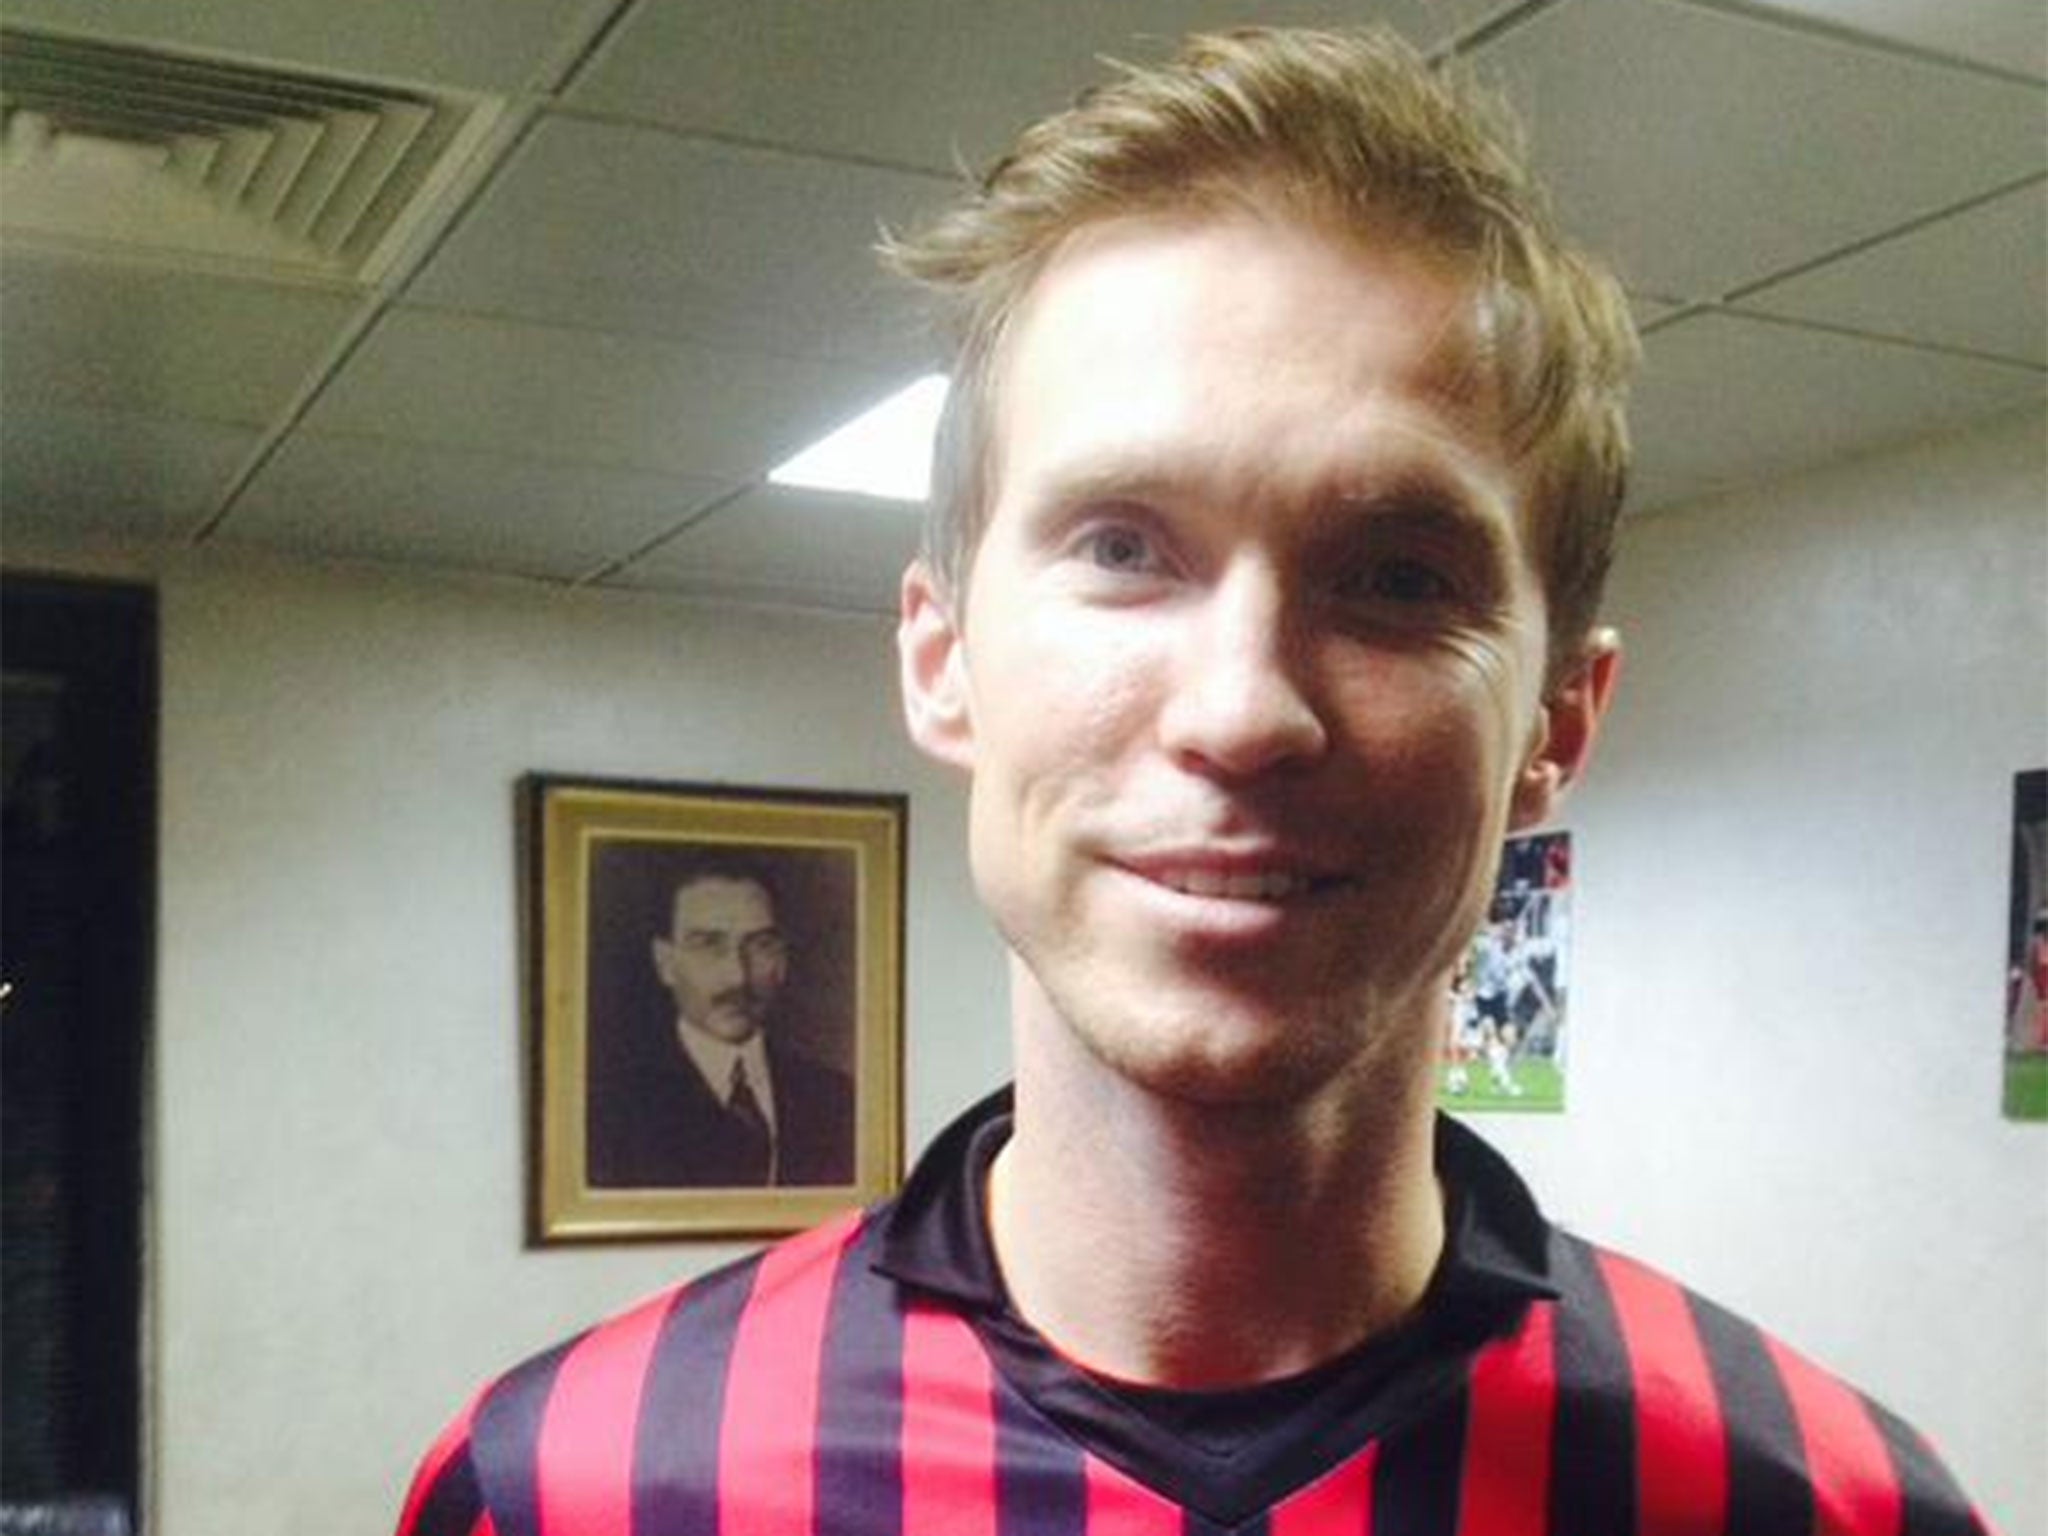 Genclerbirligi SK confirmed the signing of Alexander Hleb on their Twitter profile